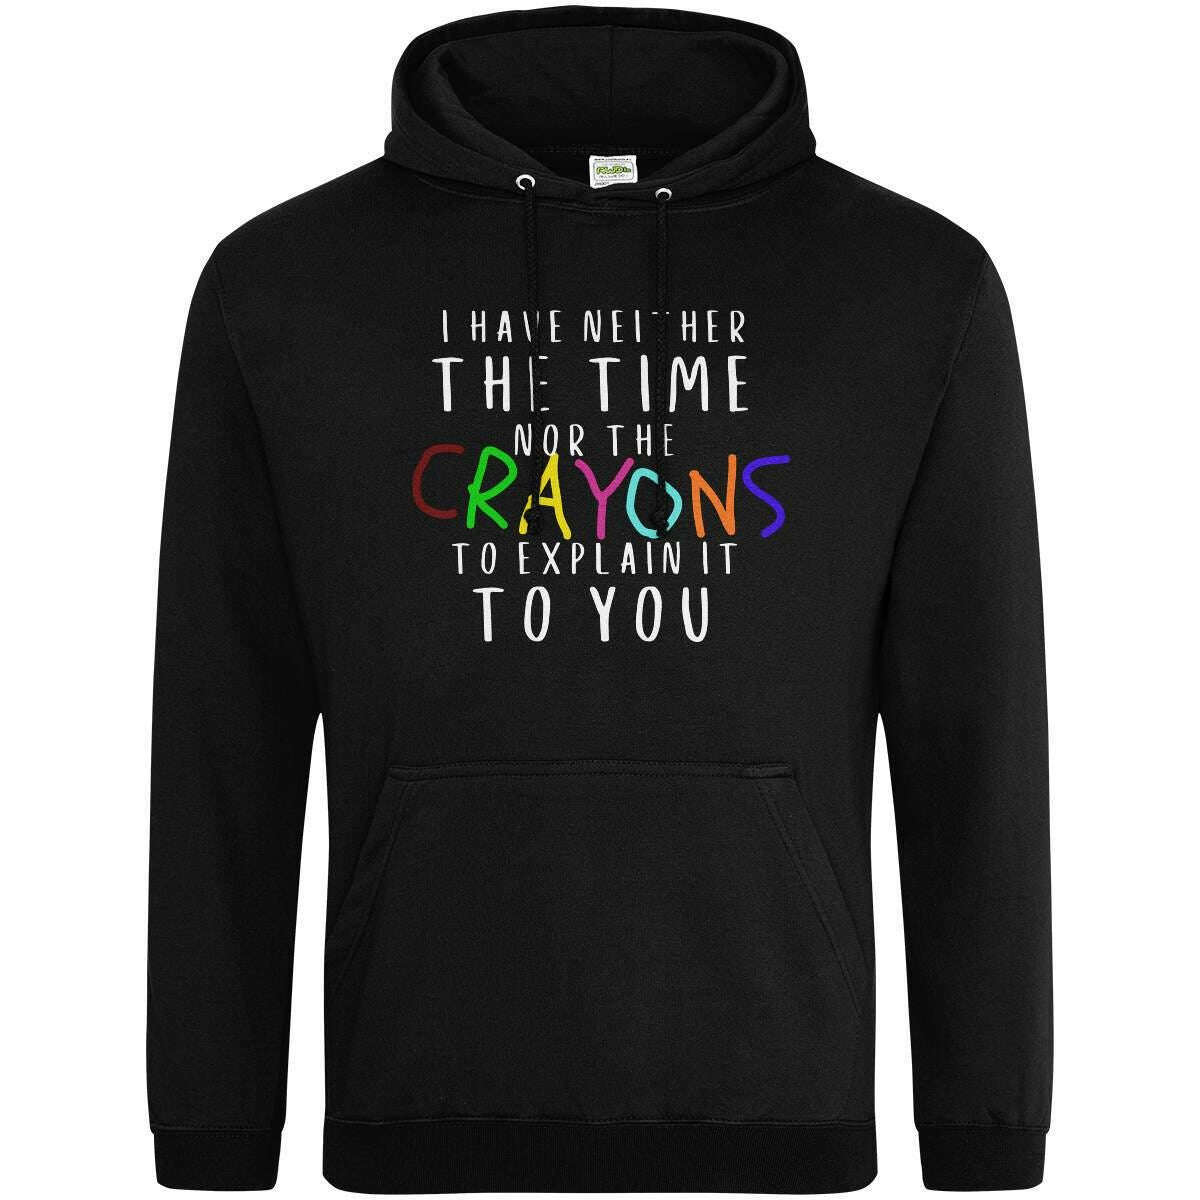 Teemarkable! Neither The Time Nor The Crayons Hoodie